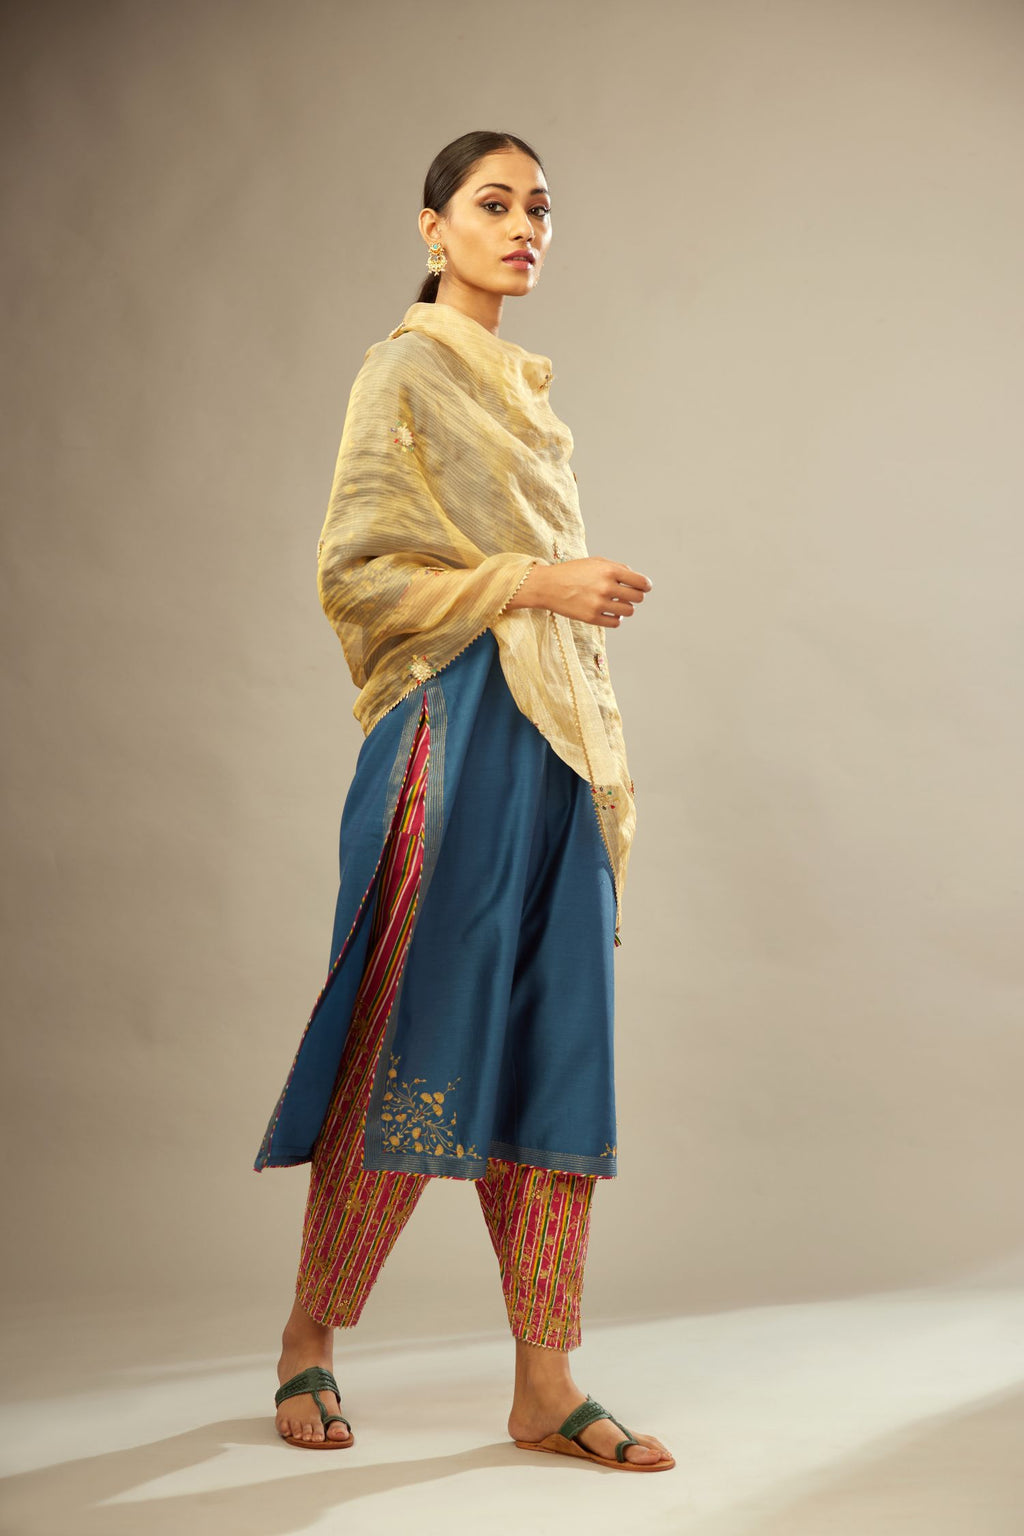 Teal blue silk Chanderi kurta set with zari embroidery, highlighted with golden zari quilting